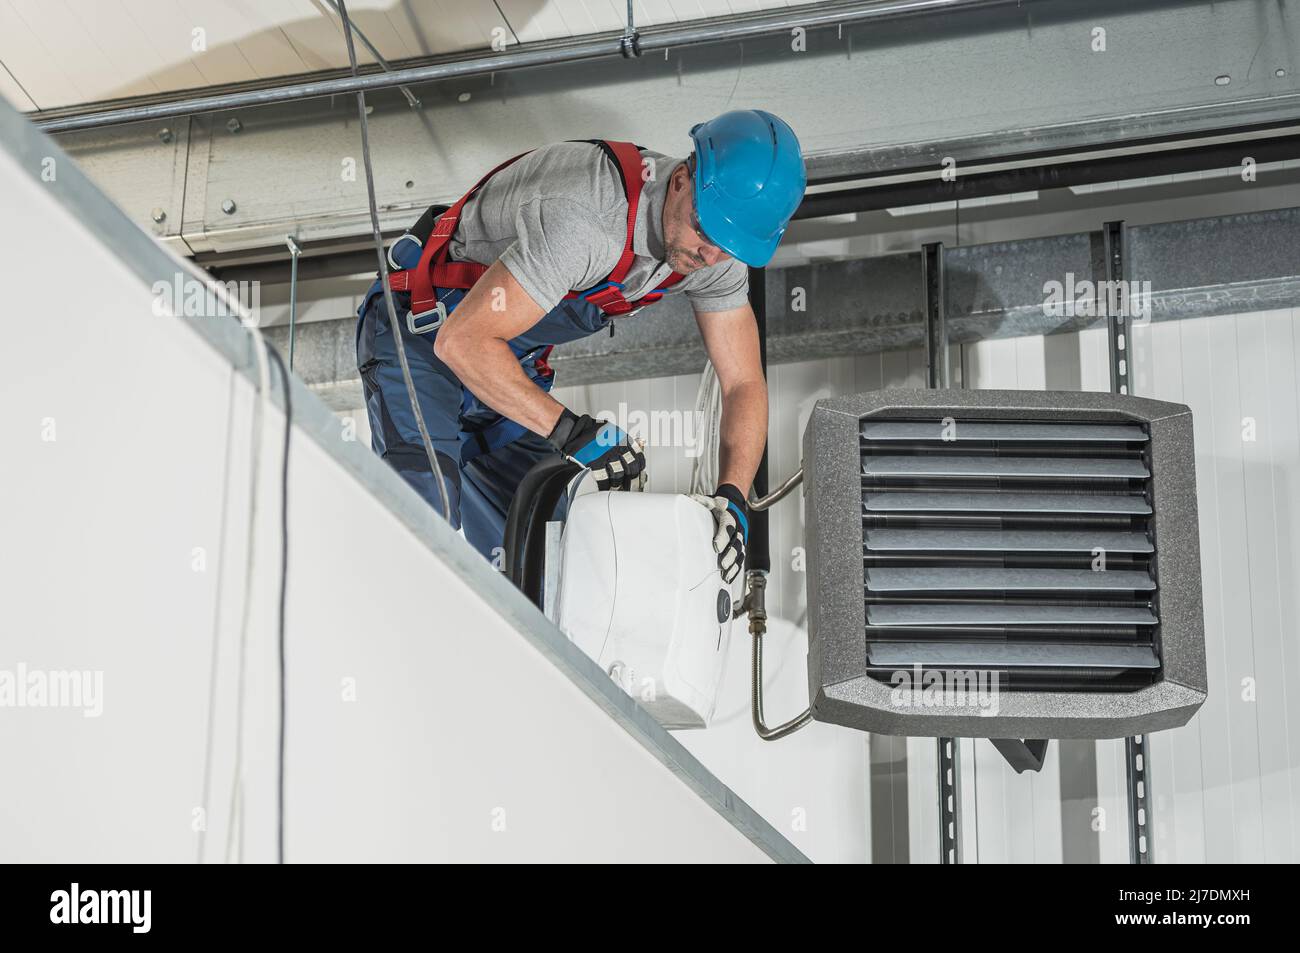 Caucasian HVAC Technician Worker in His 40s Installing Air and Water Heaters Inside Newly Constructed Warehouse. Stock Photo